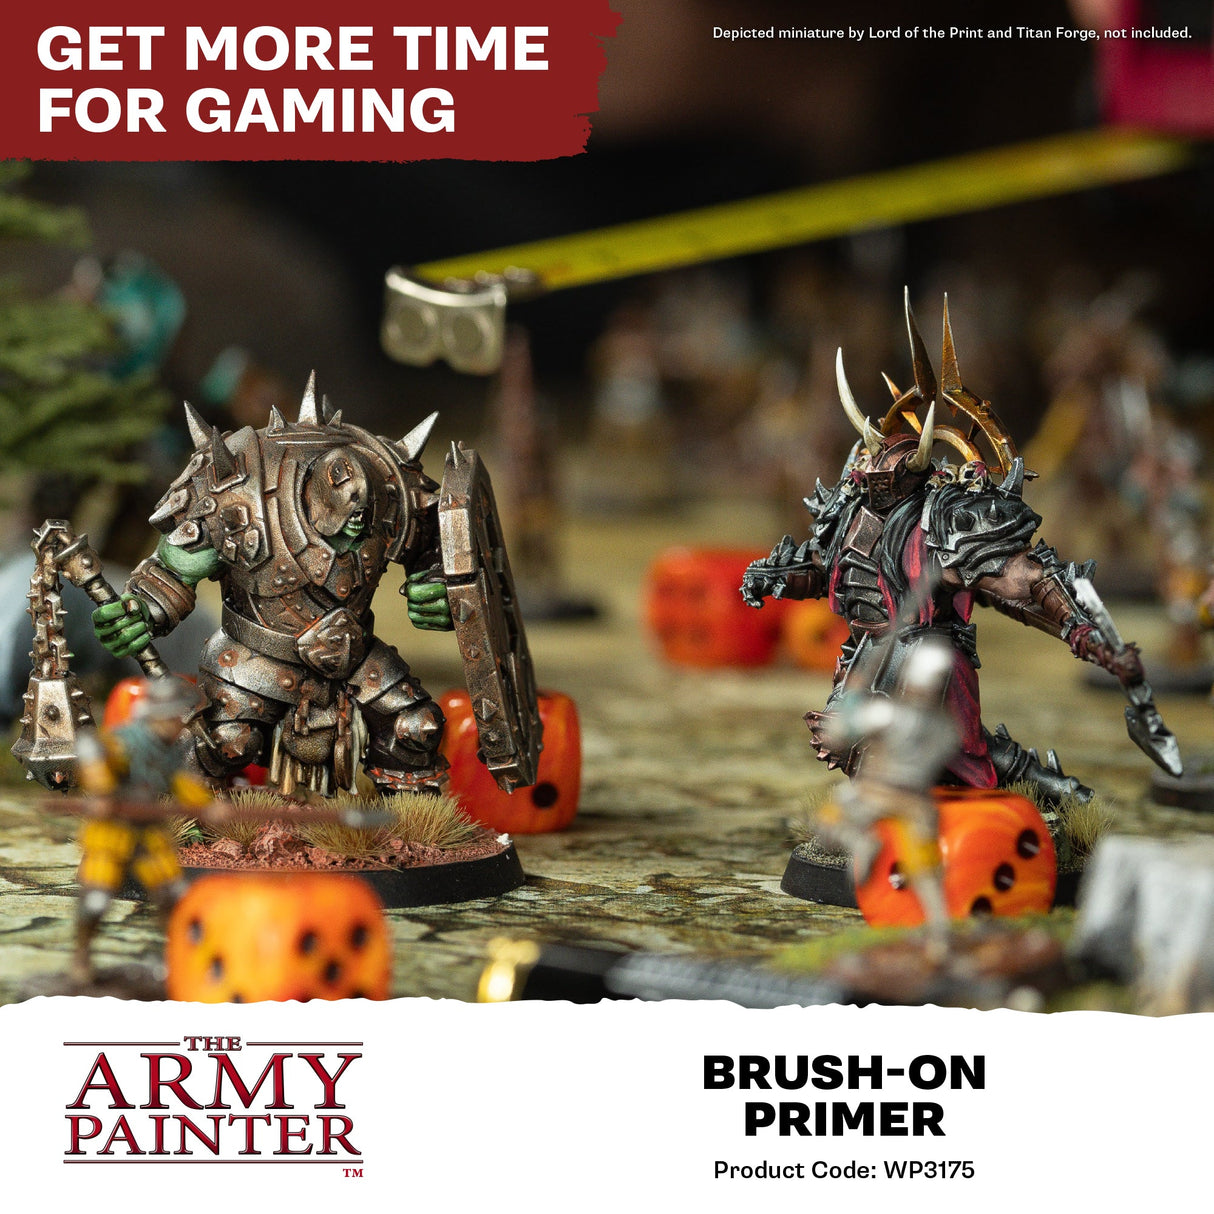 The Army Painter - Warpaints Fanatic Effects: Brush-On Primer